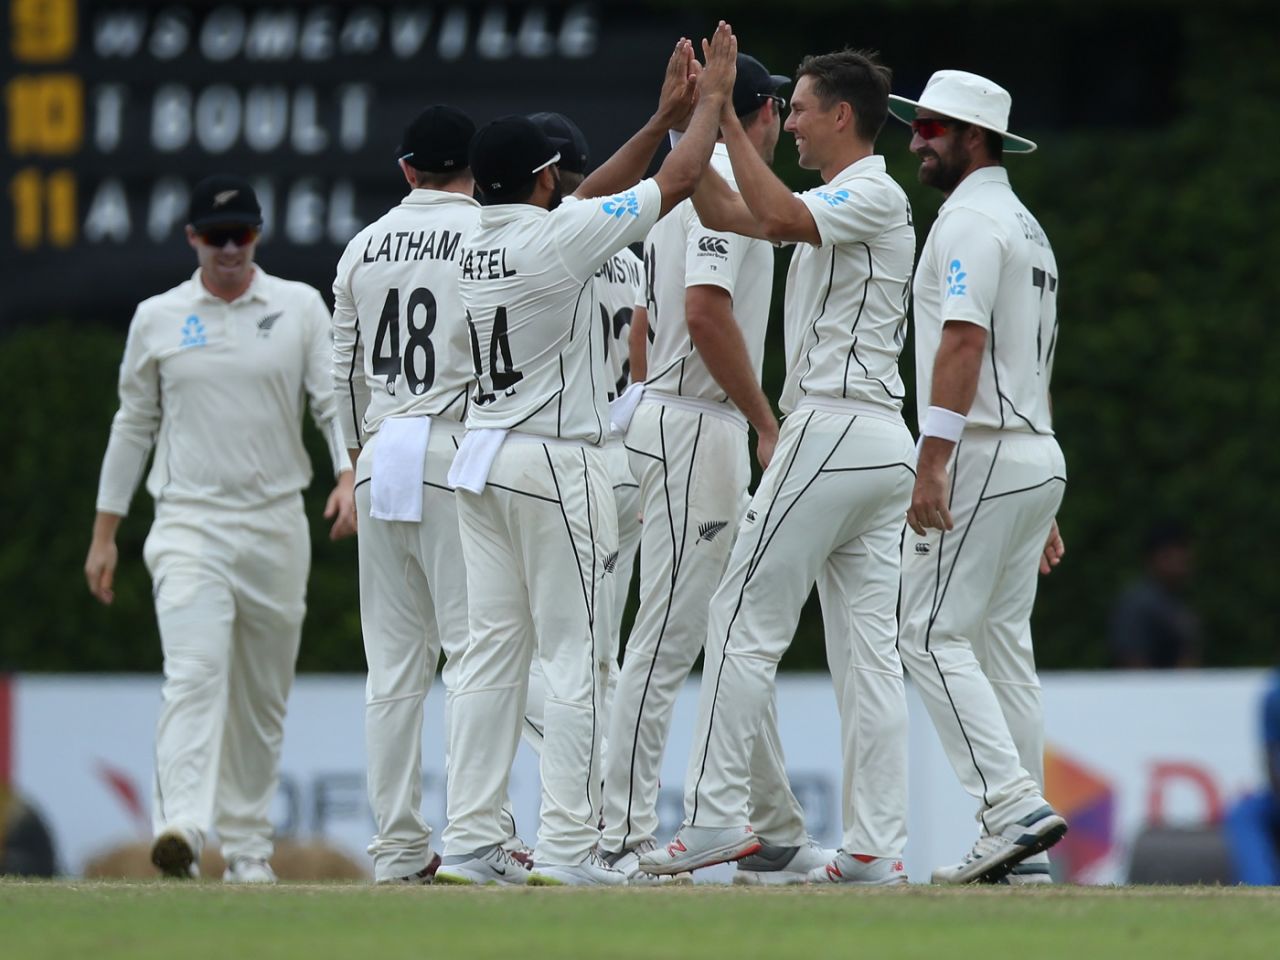 Trent Boult celebrates a wicket with a his teammates, Sri Lanka v New Zealand, 2nd Test, Colombo (PSS), Day 5, August 26, 2019